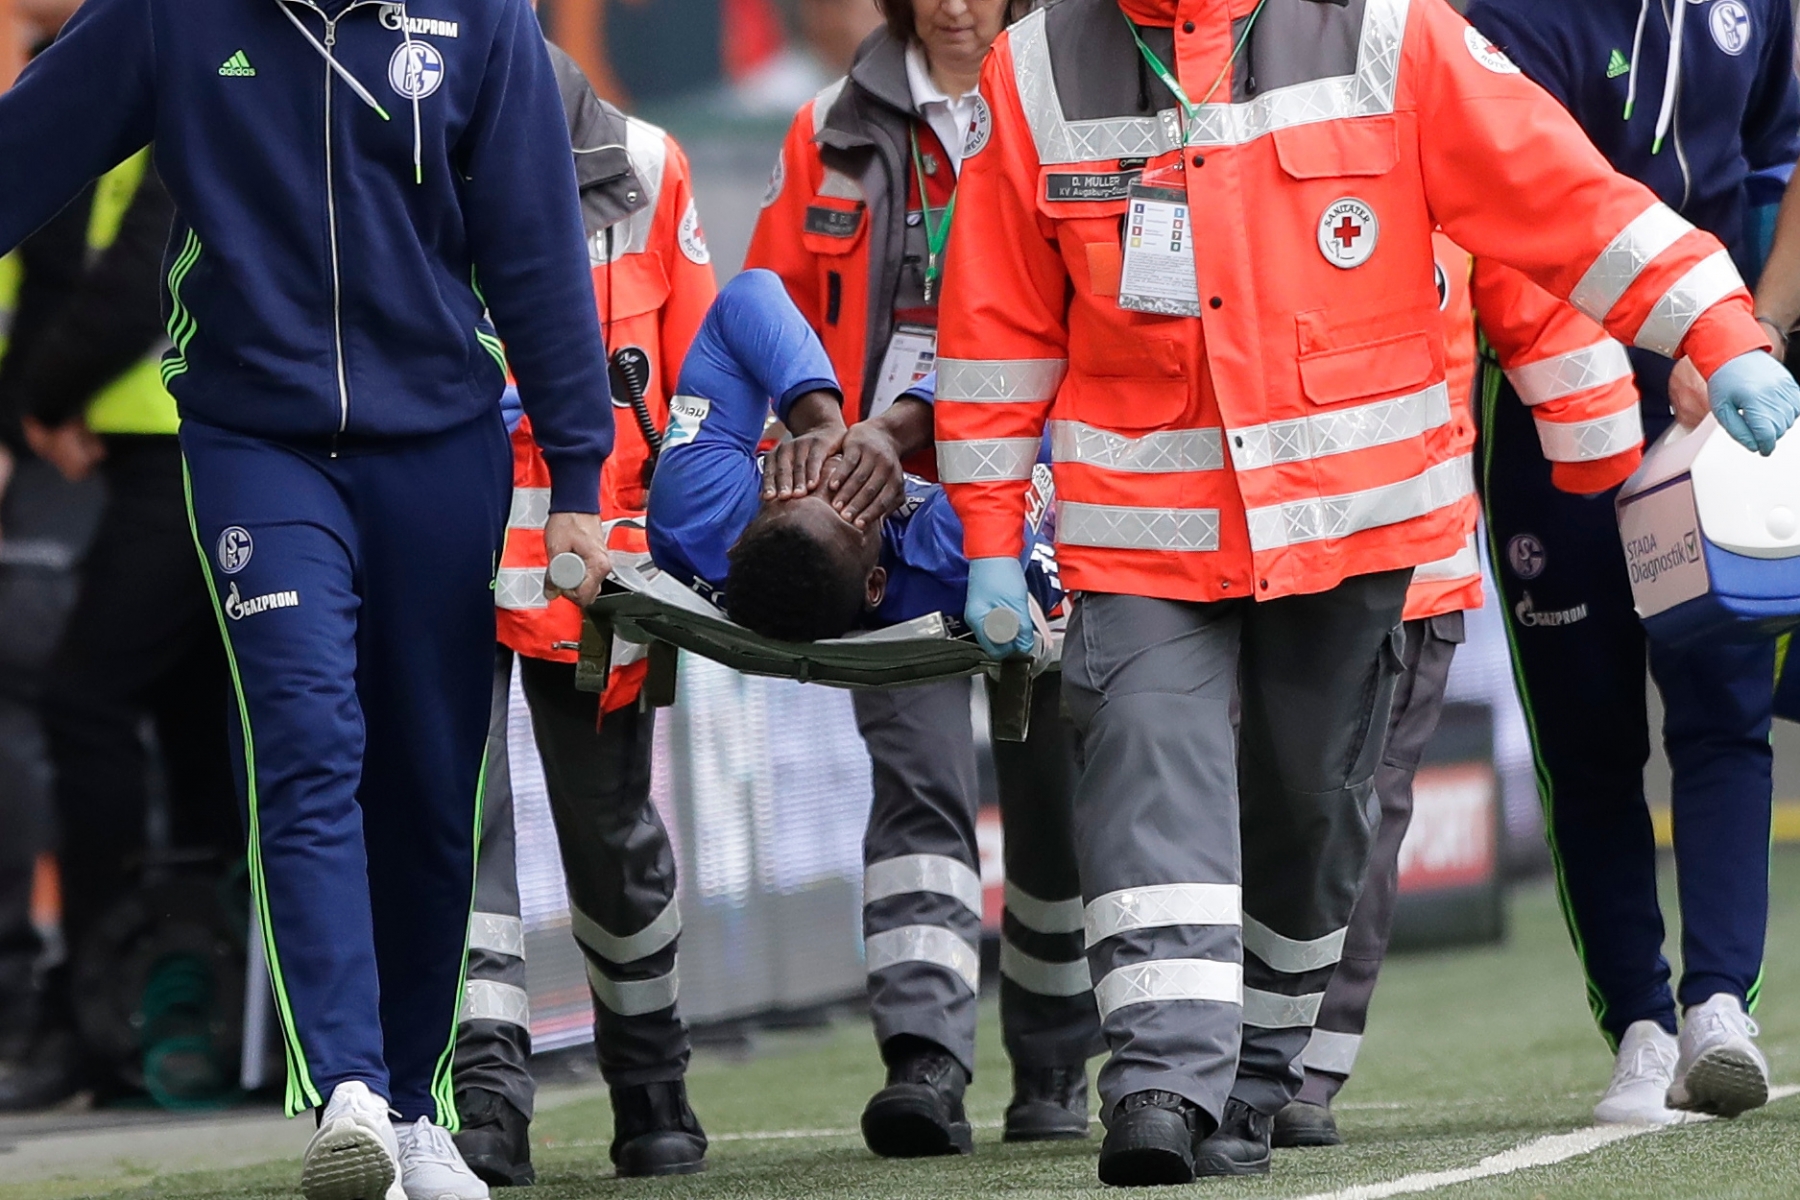 Schalke's Breel Embolo leaves the field on a stretcher during the German Bundesliga soccer match between FC Augsburg and FC Schalke 04 in Augsburg, Germany, Saturday, Oct. 15, 2016. (AP Photo/Matthias Schrader) Germany Soccer Bundesliga